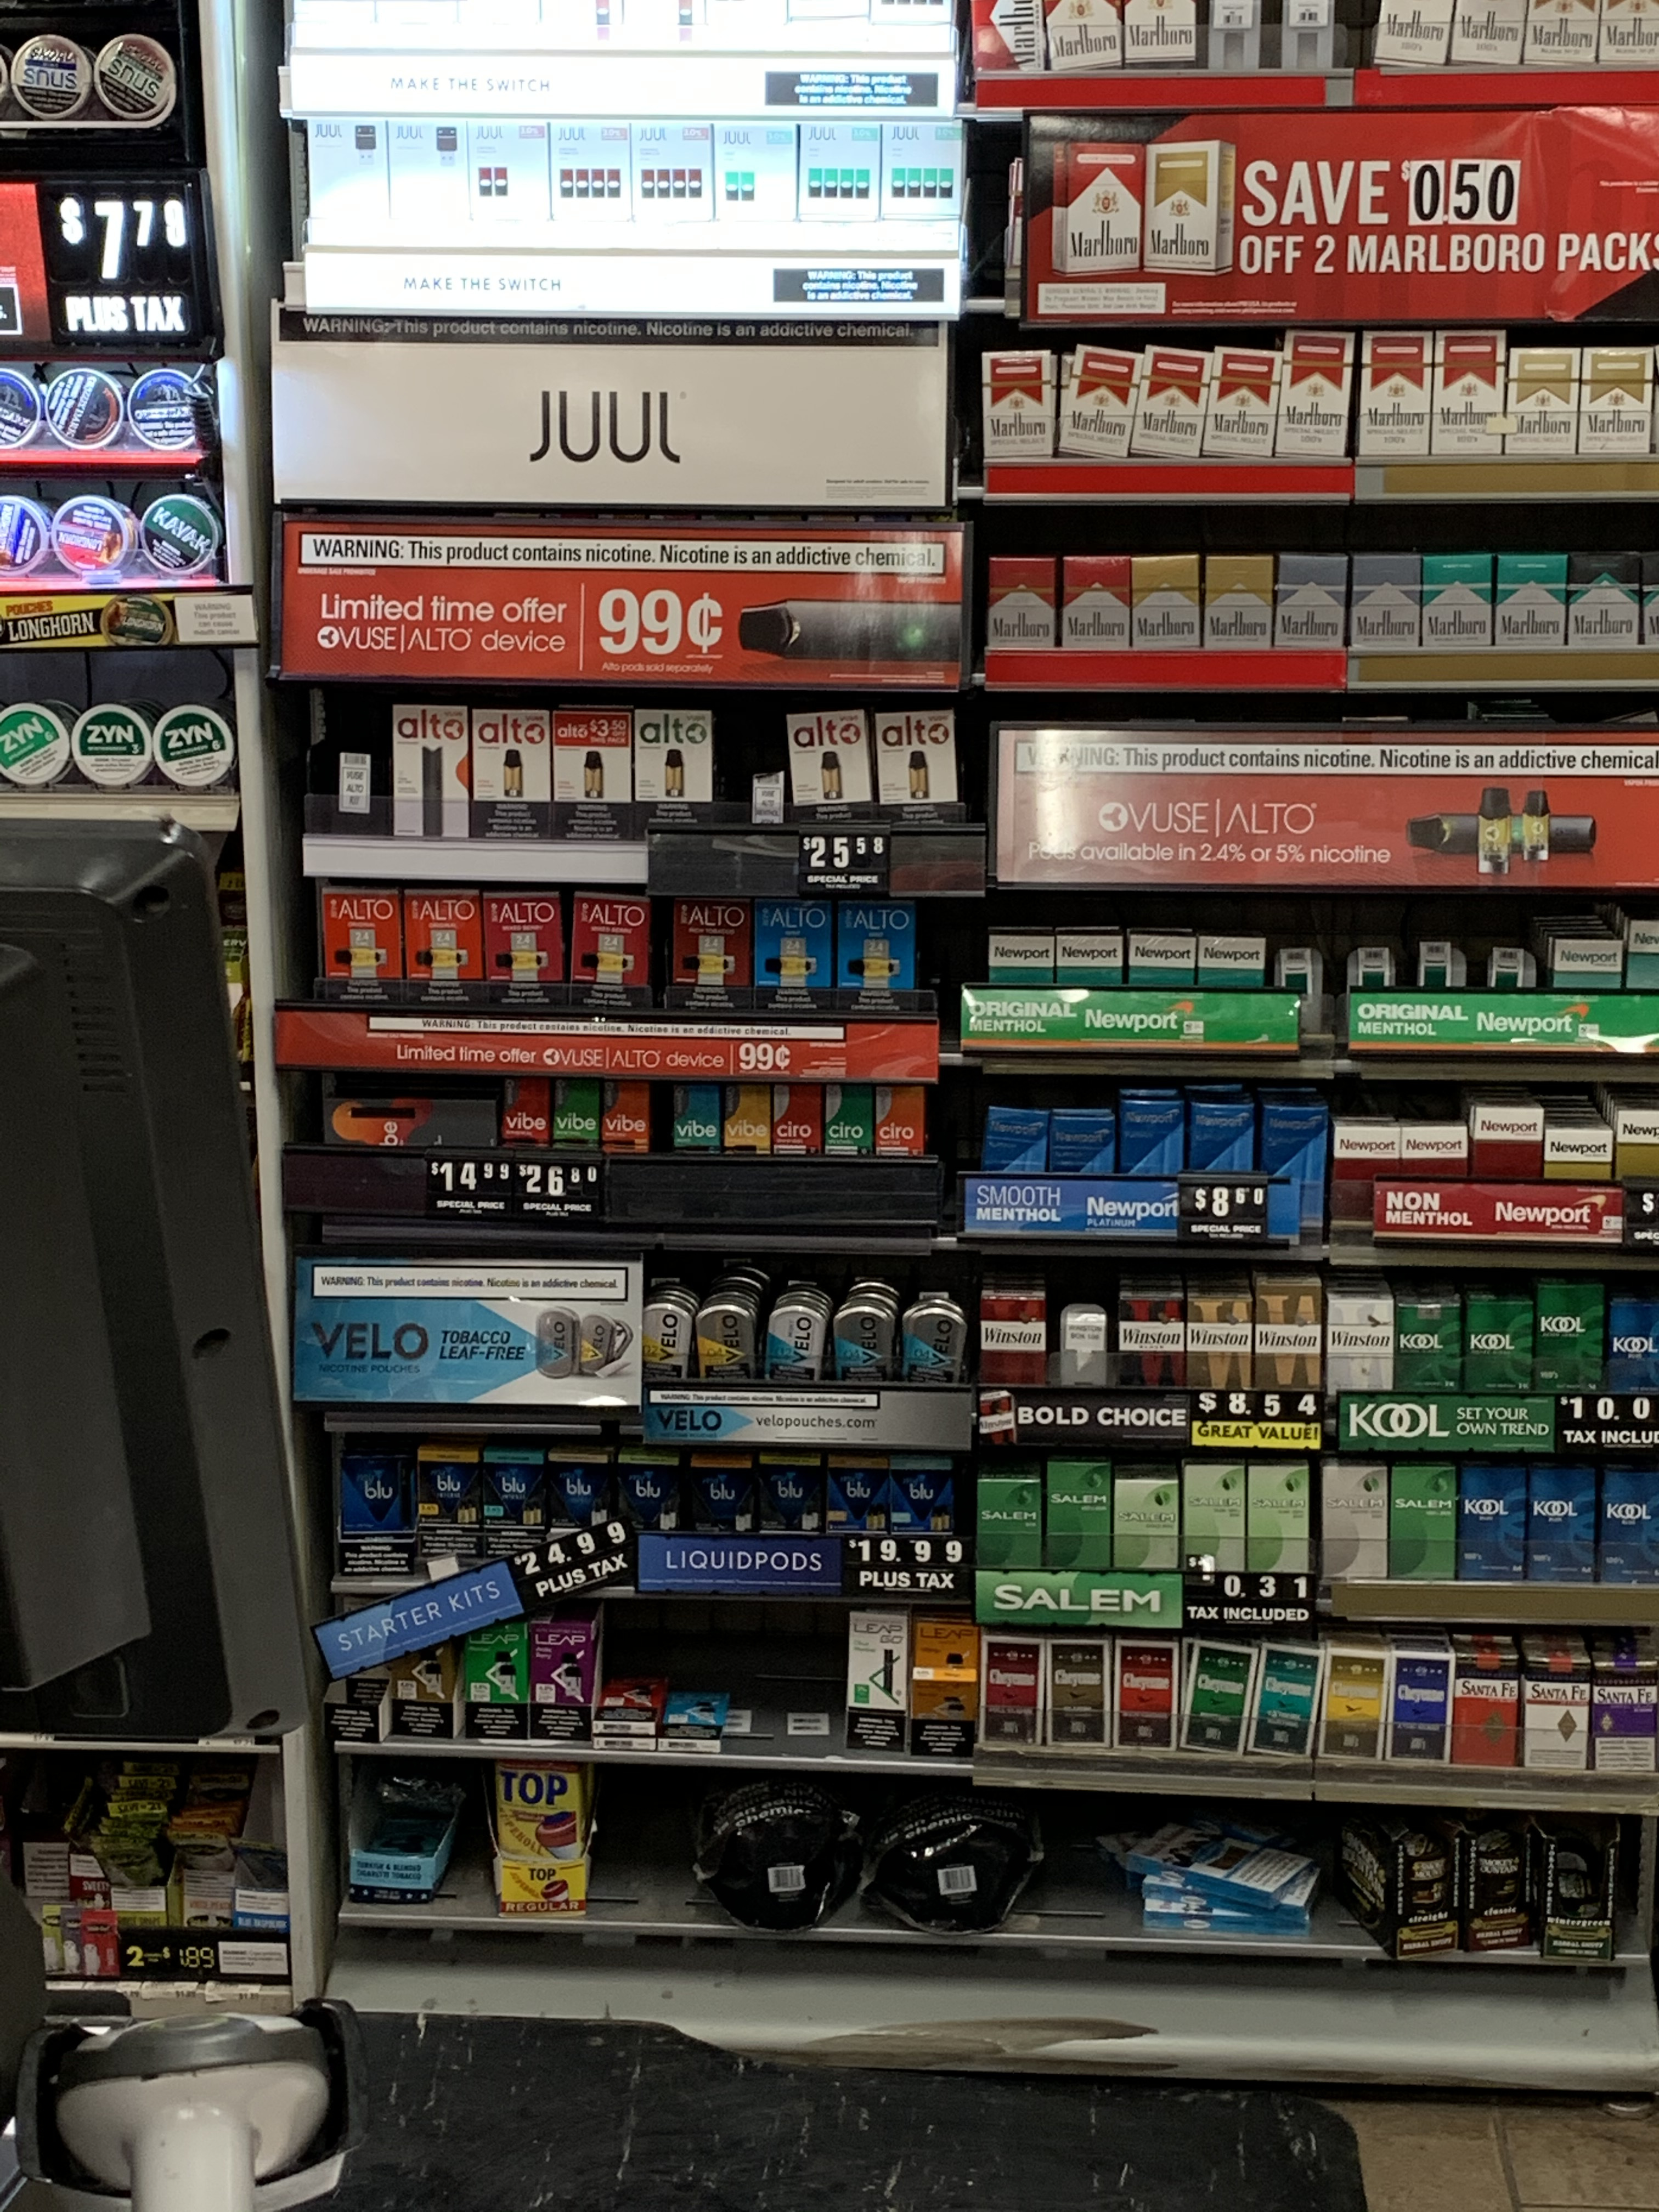 Vuse e-cigarette devices on sale for 99 cents each